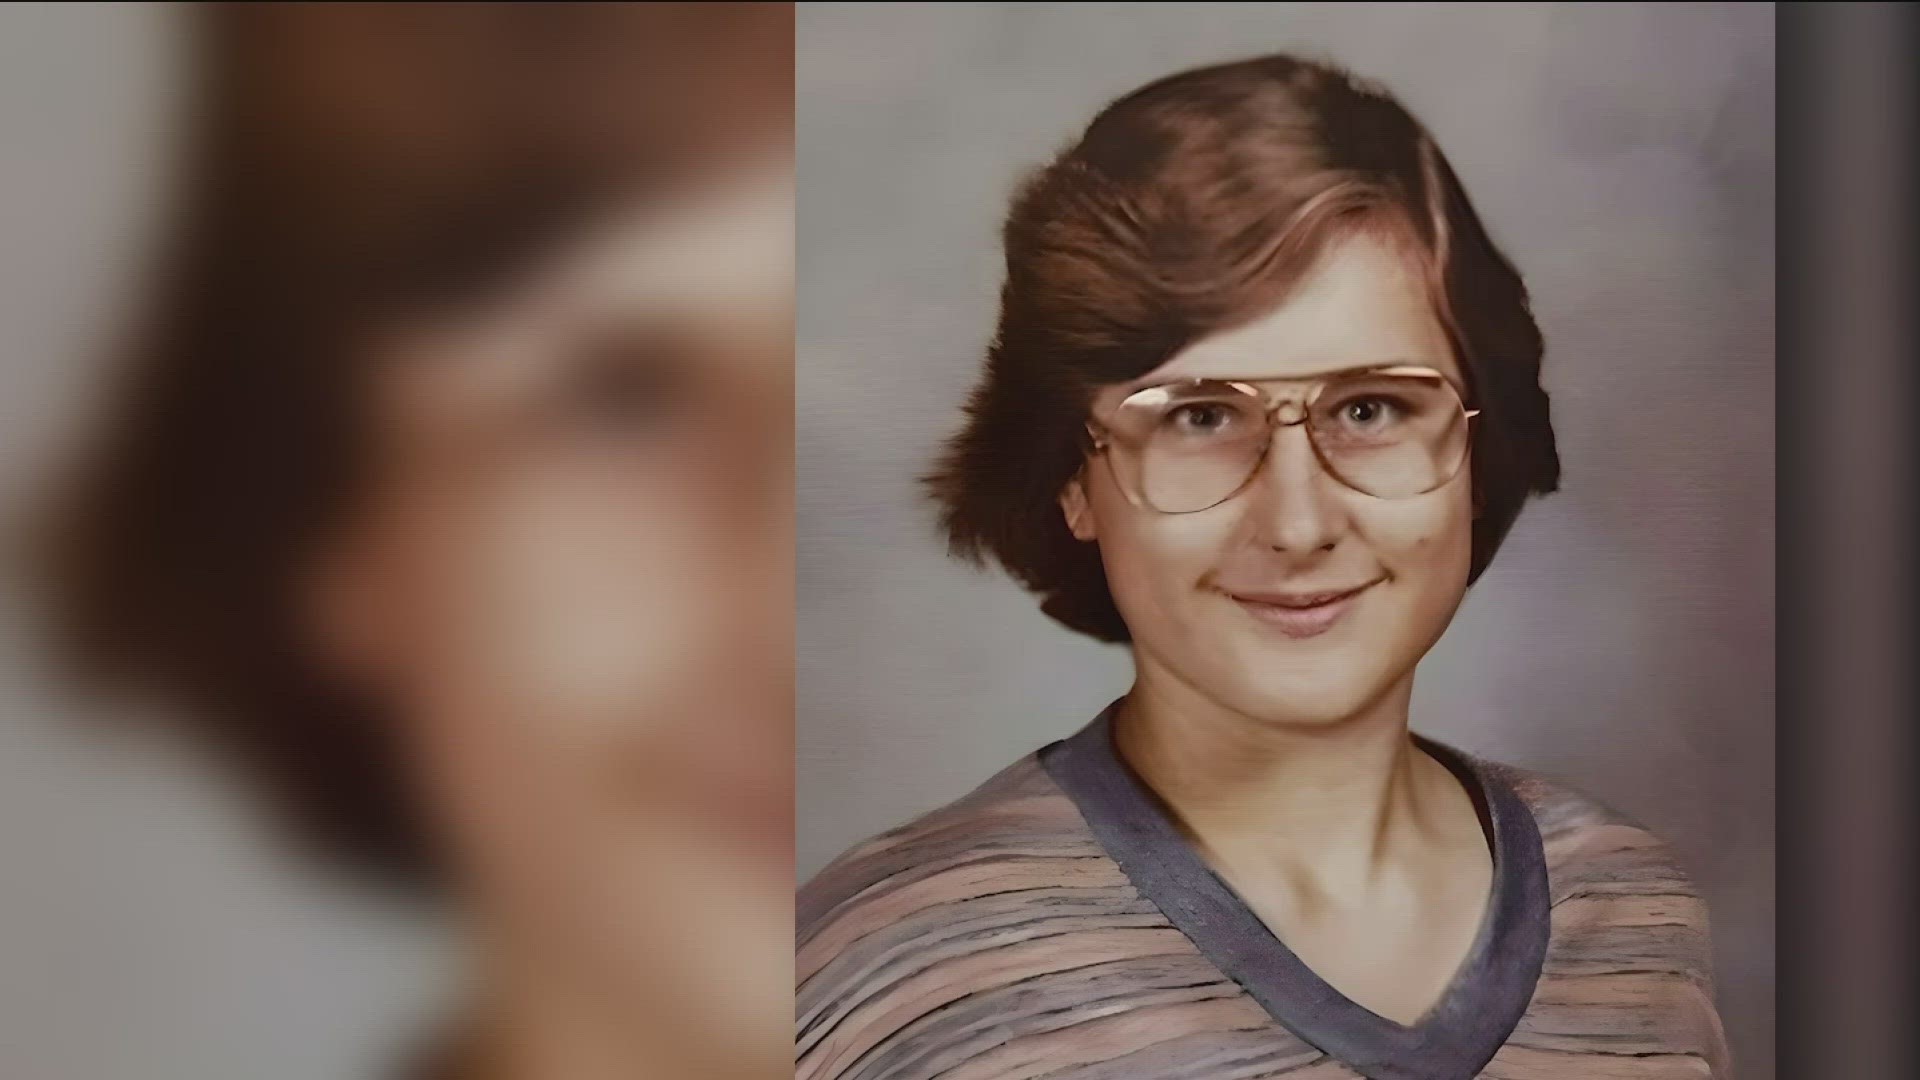 Genetic evidence has enabled investigators to identify a woman's remains found in Warner Springs 37 years ago as those of a presumed homicide victim from the 1980's.